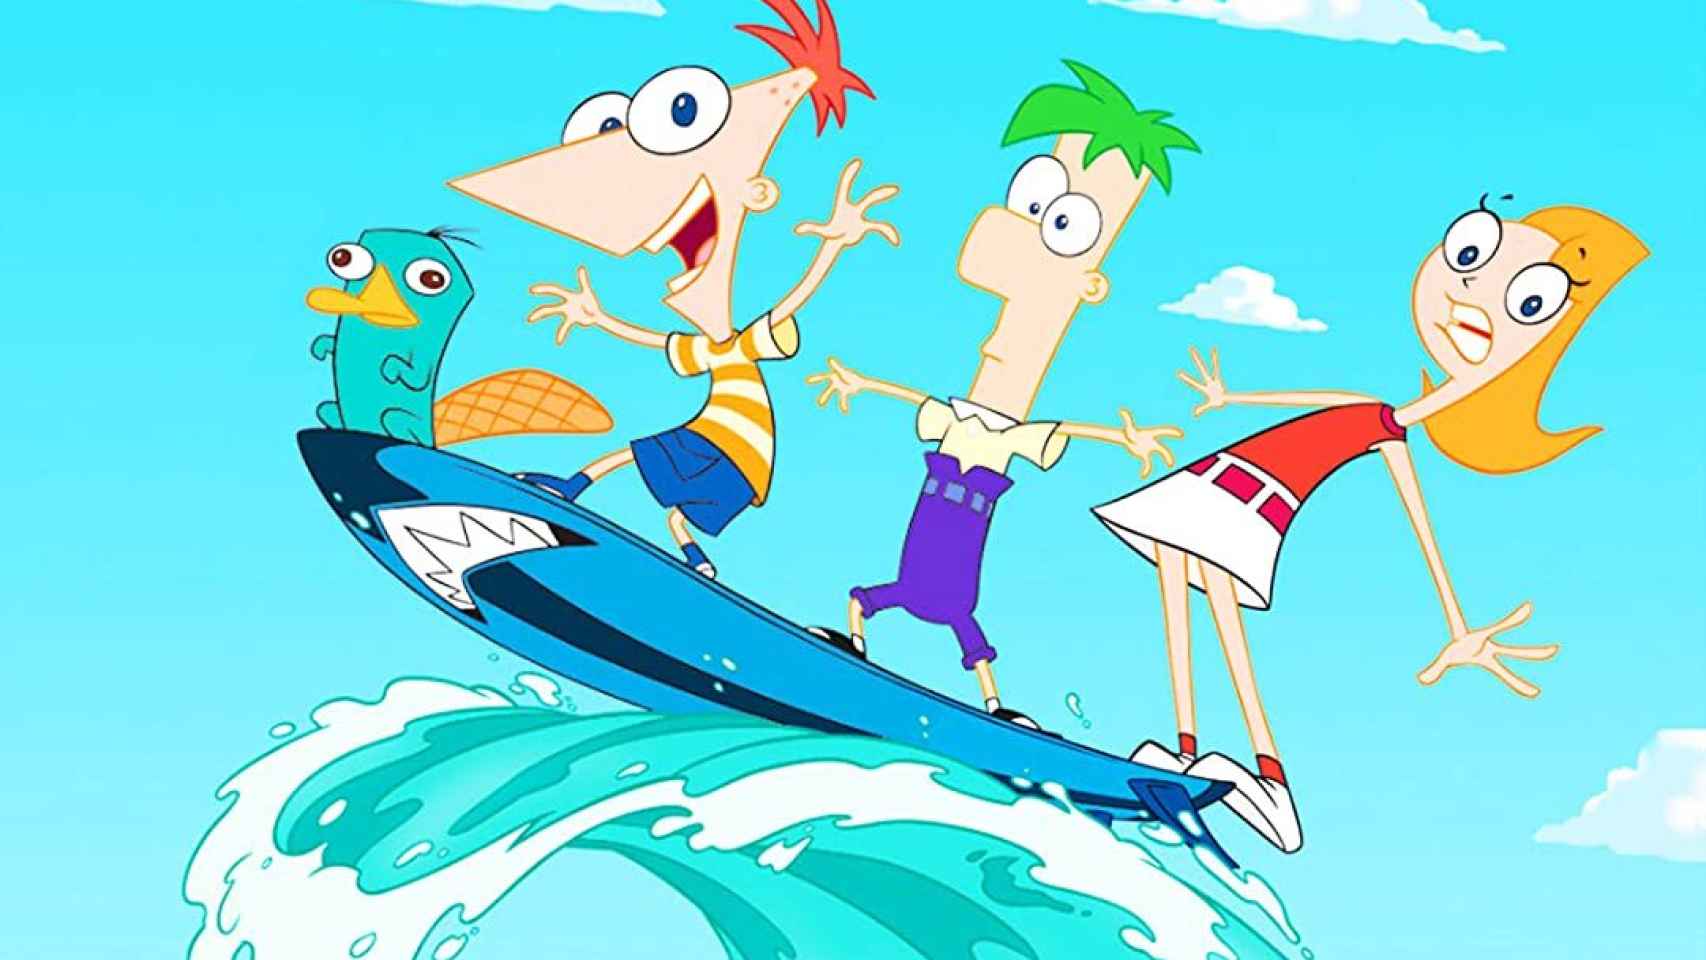 Phineas y Ferb.